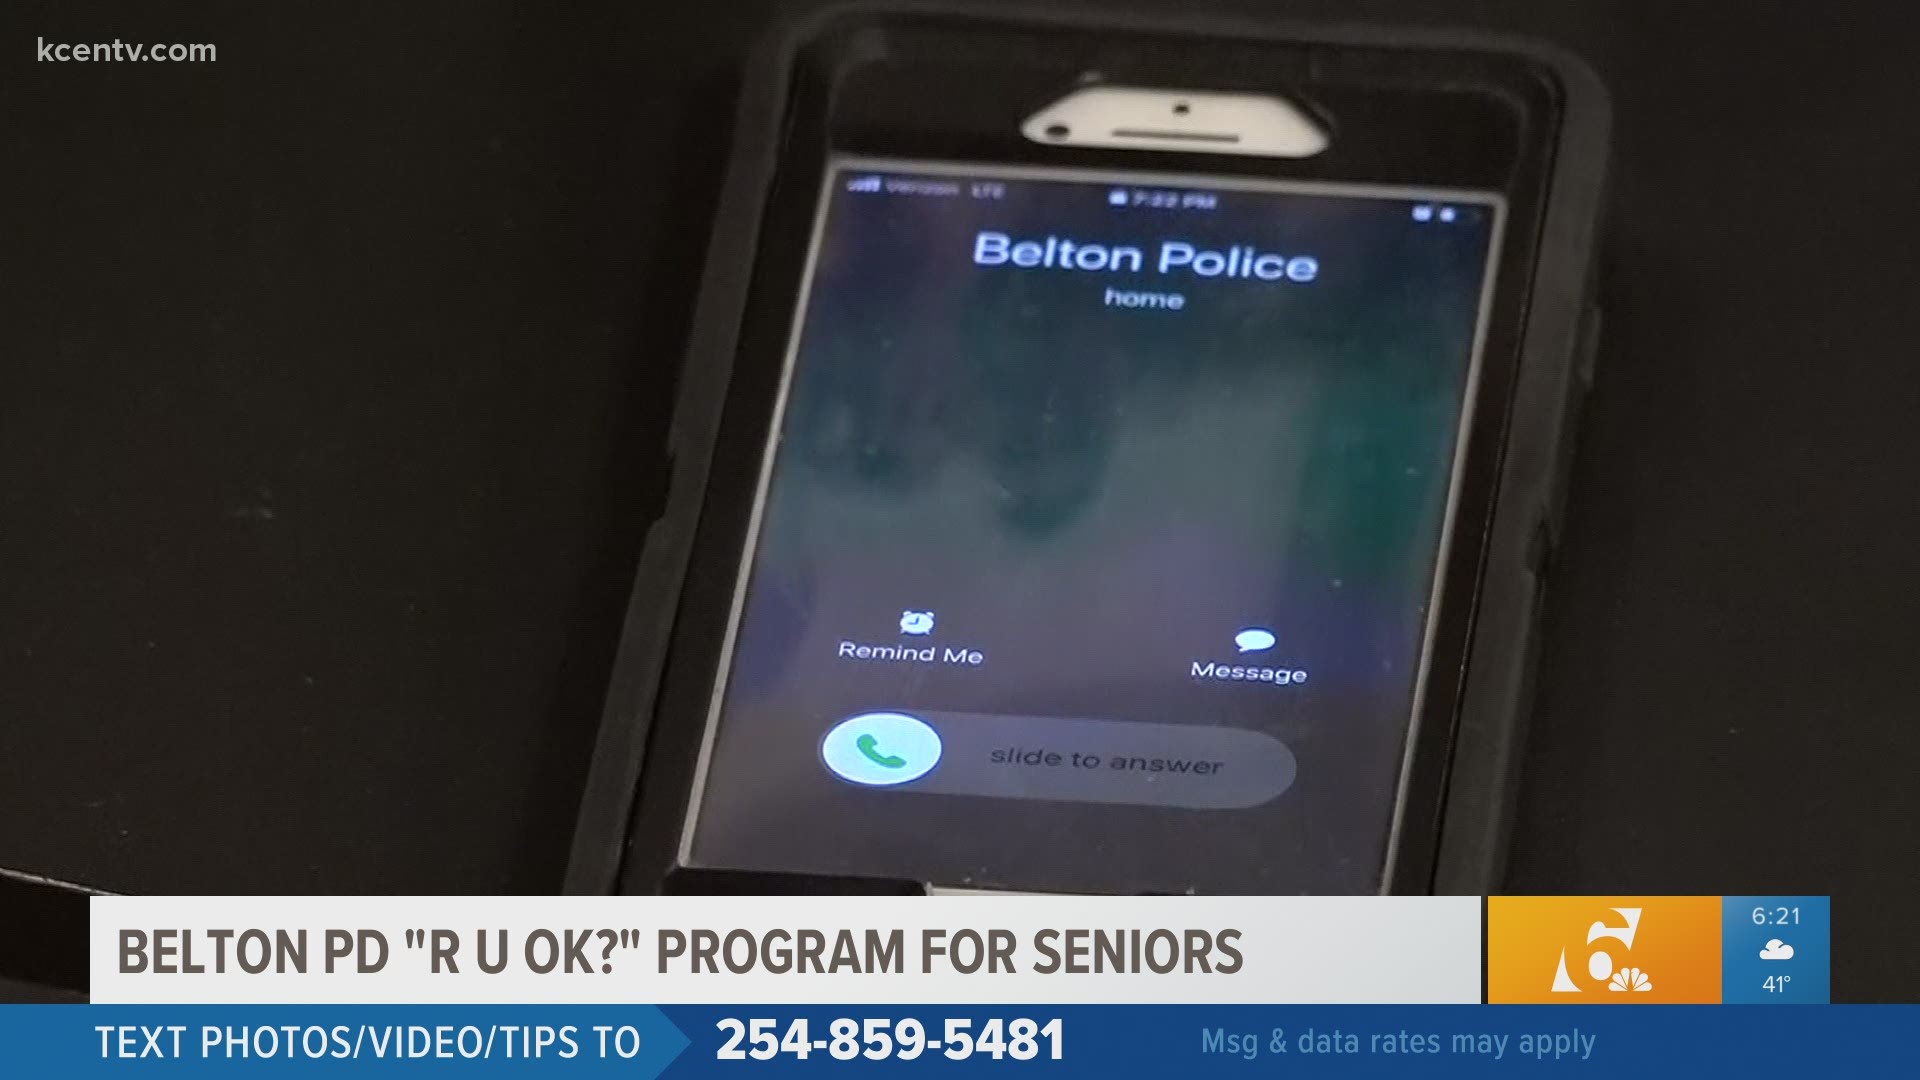 Officers and volunteers will reach out to seniors enrolled in the program to make sure they are okay. Sometimes, that's the only call they get all week.